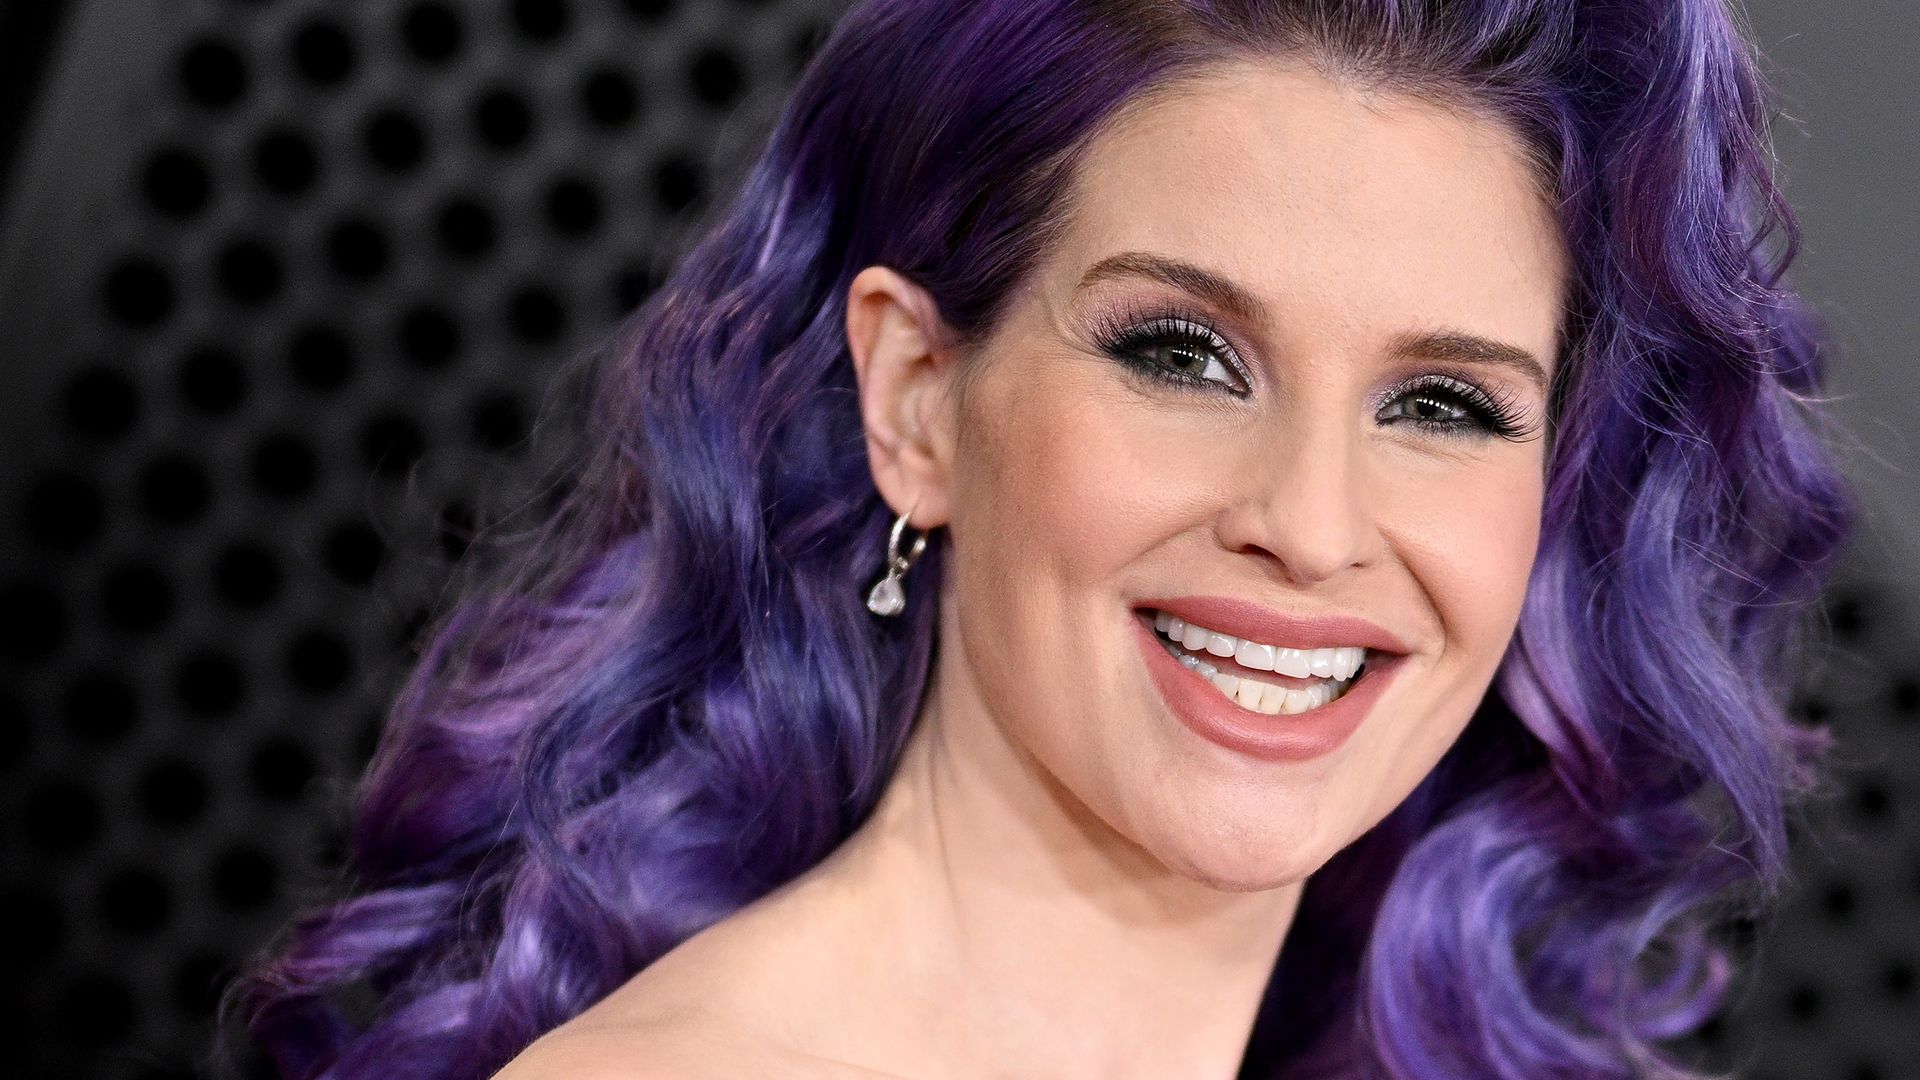 Kelly Osbourne makes surprising confession about her past addictions